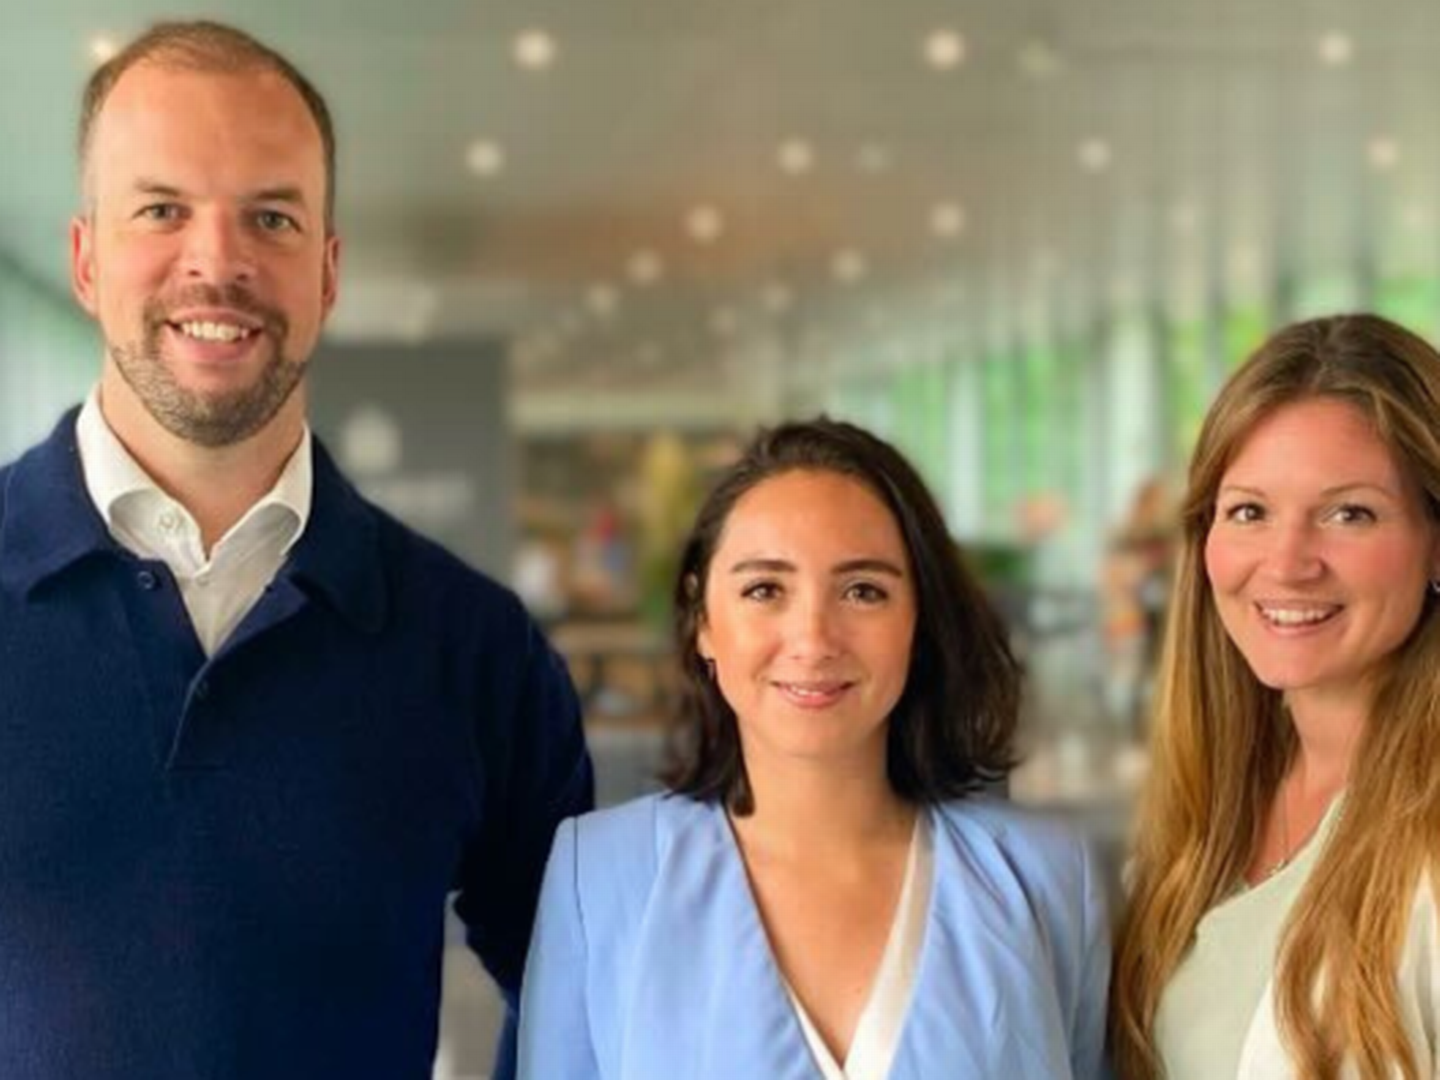 Maersk Growth's new management team consists of CEO Jonas Linnebjerg, as well as Alexa Ríos, who will be responsible for strategic business innovation, Ida Christine Brun, who will be head of ecosystem management. | Foto: Maersk Growth